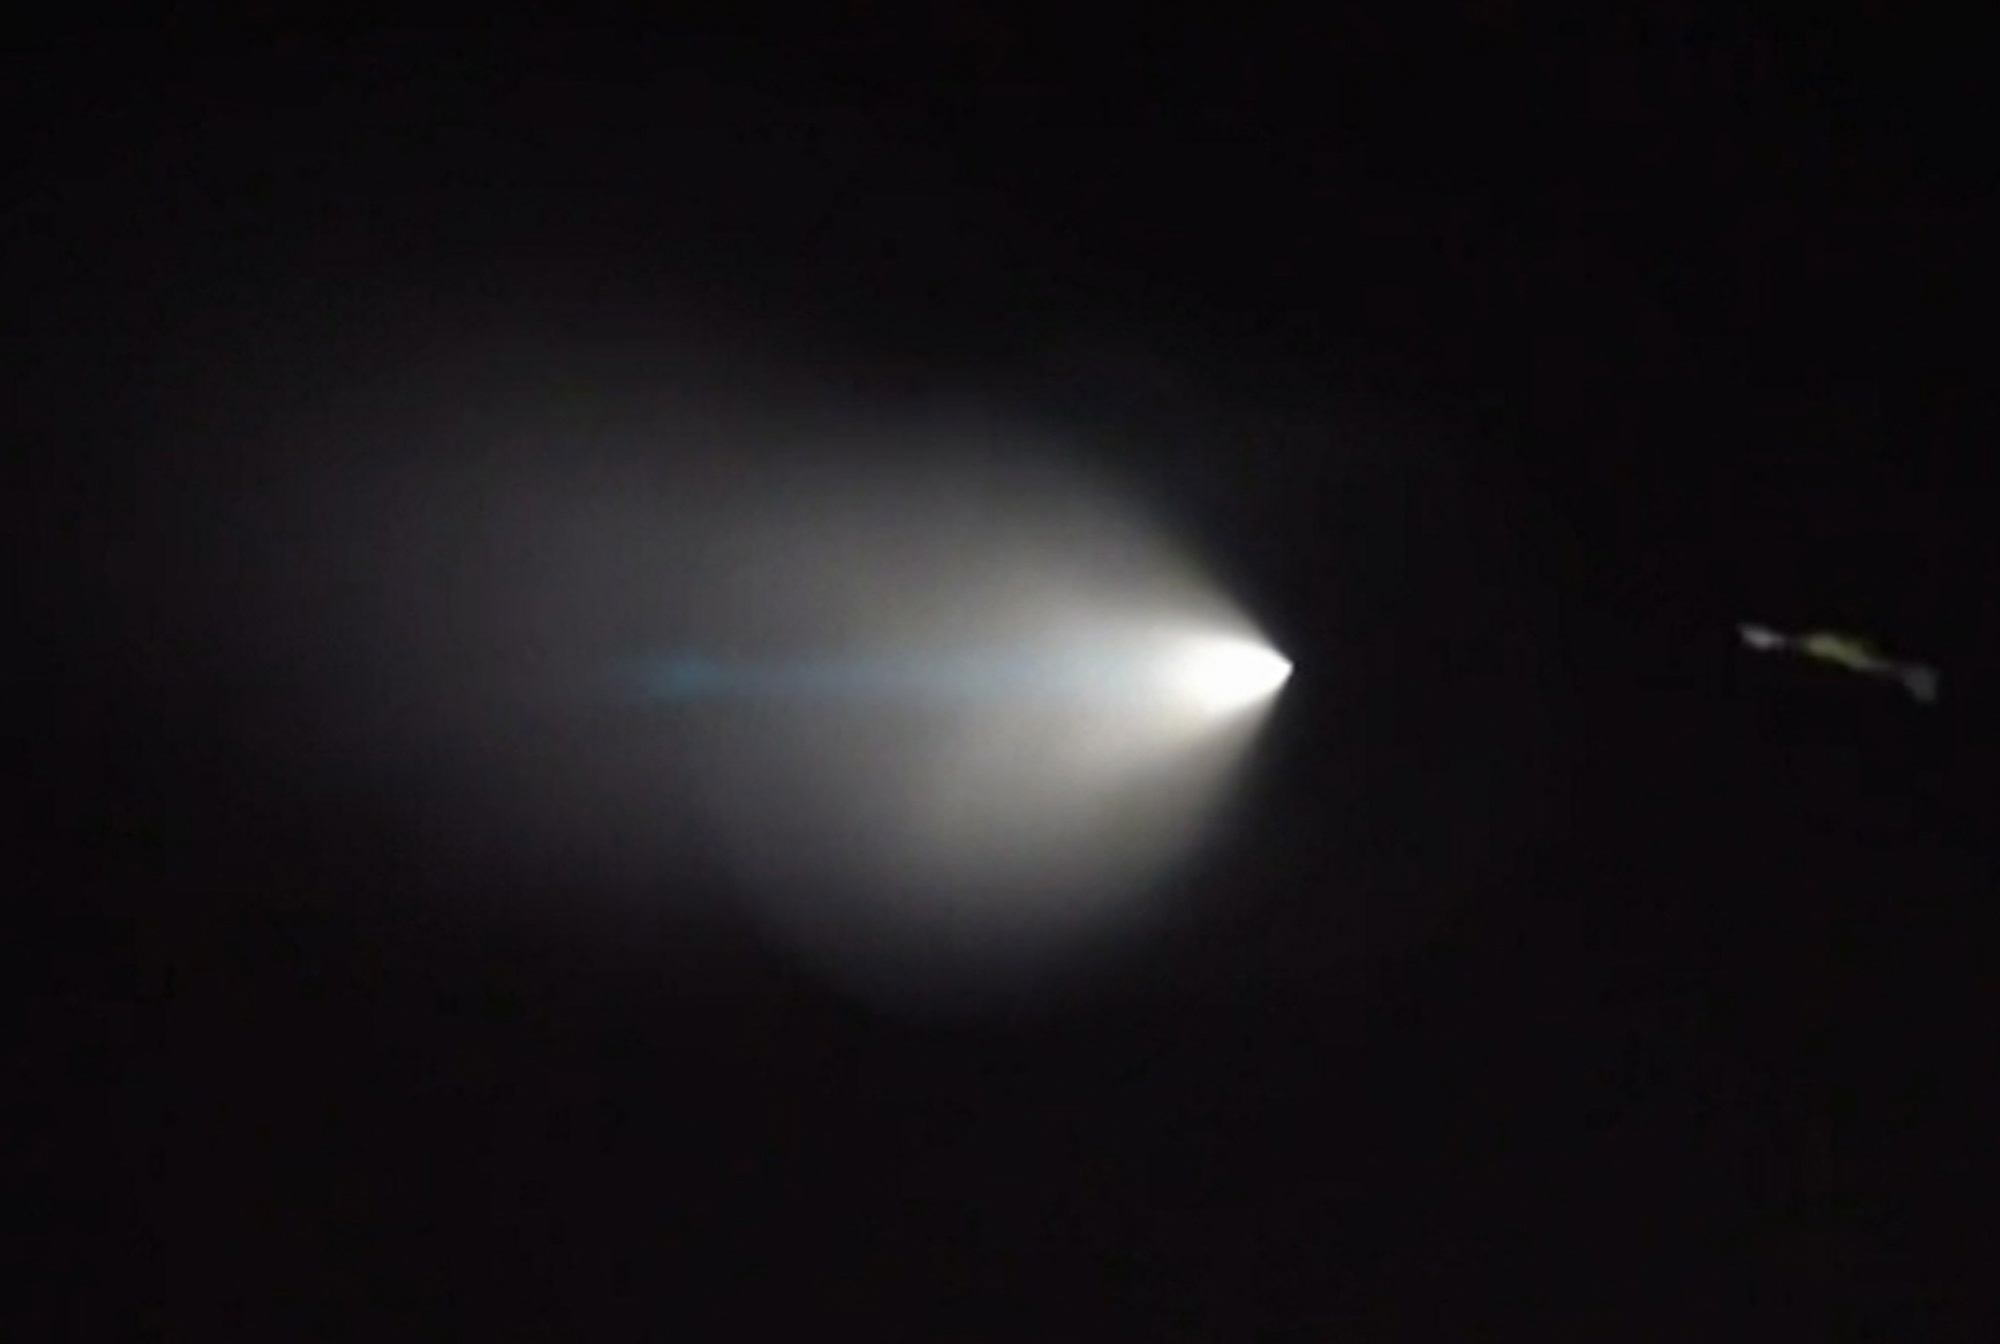 This Saturday image from video provided by Julien Solomita, shows an unarmed missile fired by the U.S. Navy from a submarine off the coast of Southern California, creating a bright light that streaked across the state and was visible as far away as Nevada and Arizona.